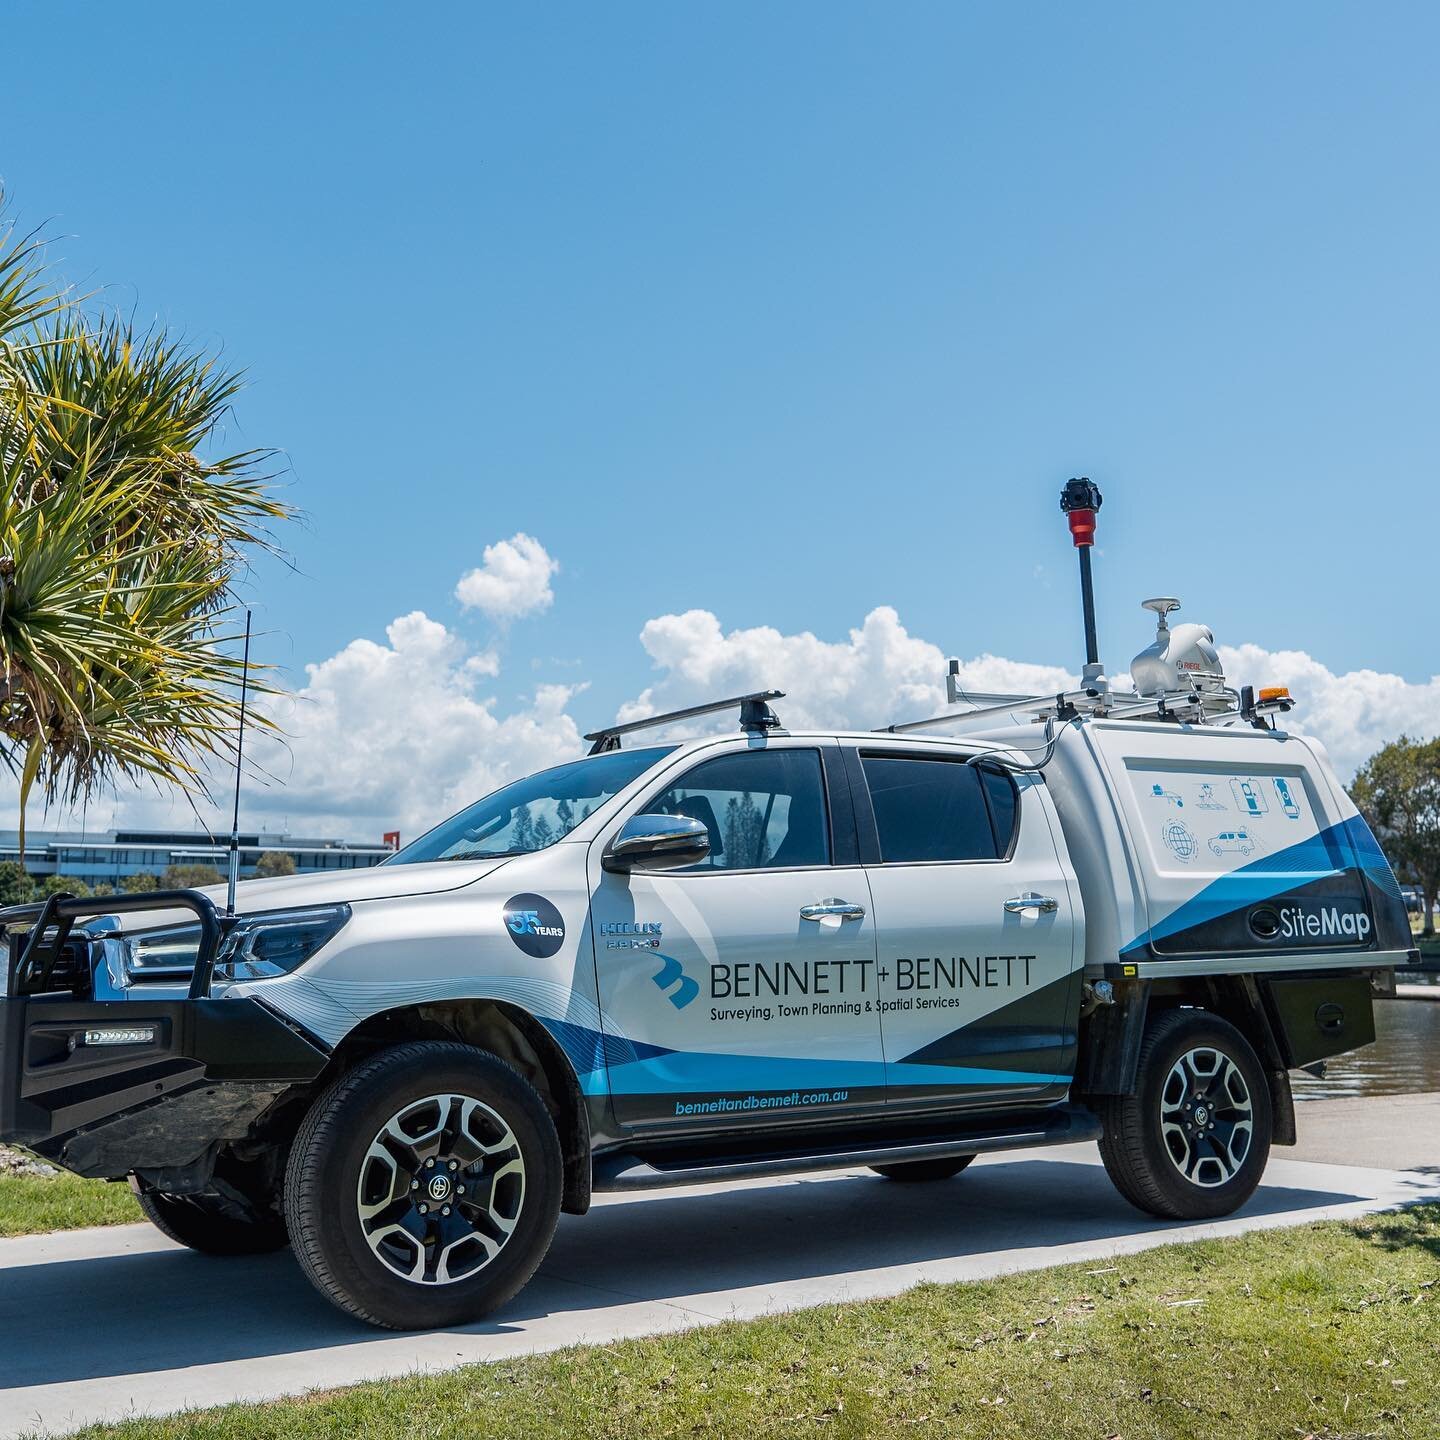 @bennettandbennett make use of the RIEGL VMQ mobile mapping system, which also converts to a fully functioning helicopter based airborne mapping system when required. 

We love the new wrap!

#mobilemapping #airbornemapping #riegl #ultimatelidar #3dl